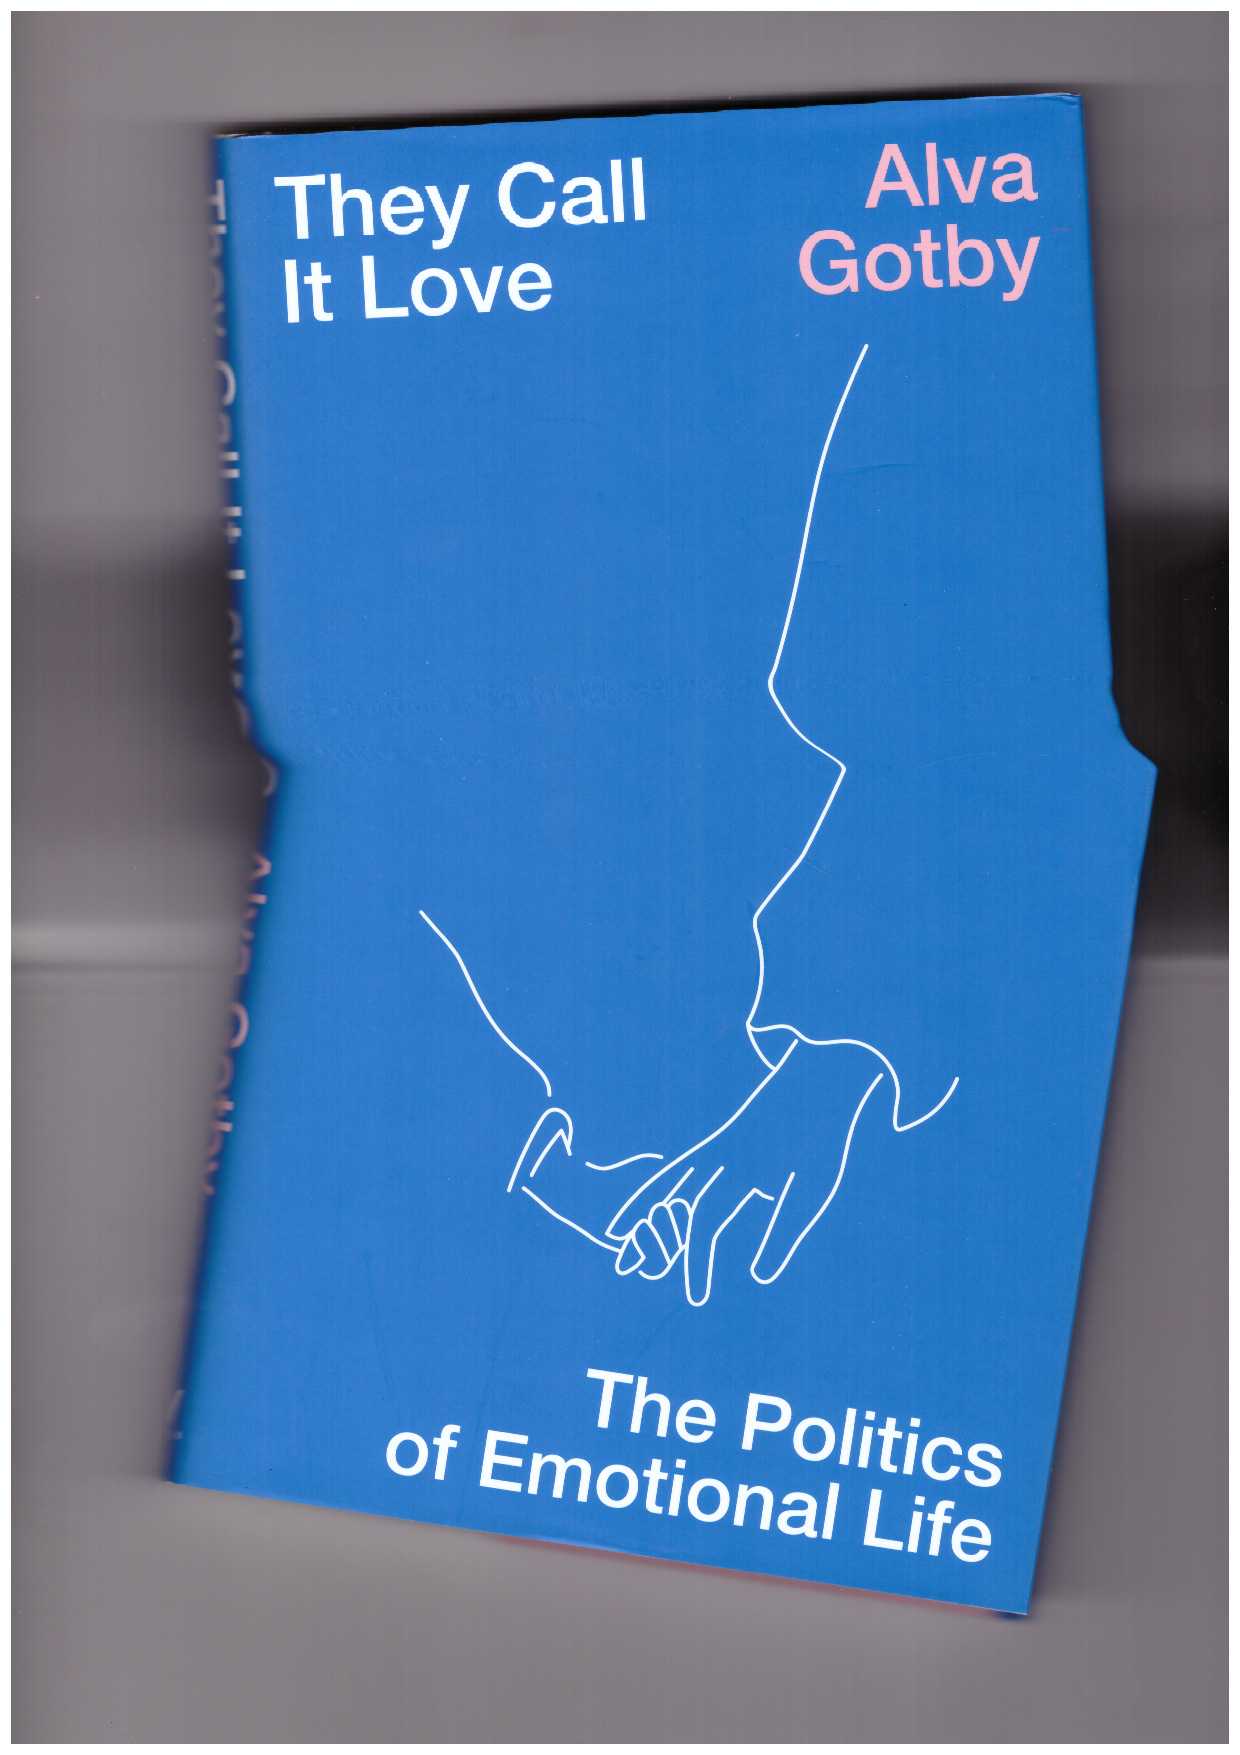 GOTBY, Alva - They Call It Love. The Politics of Emotional Life